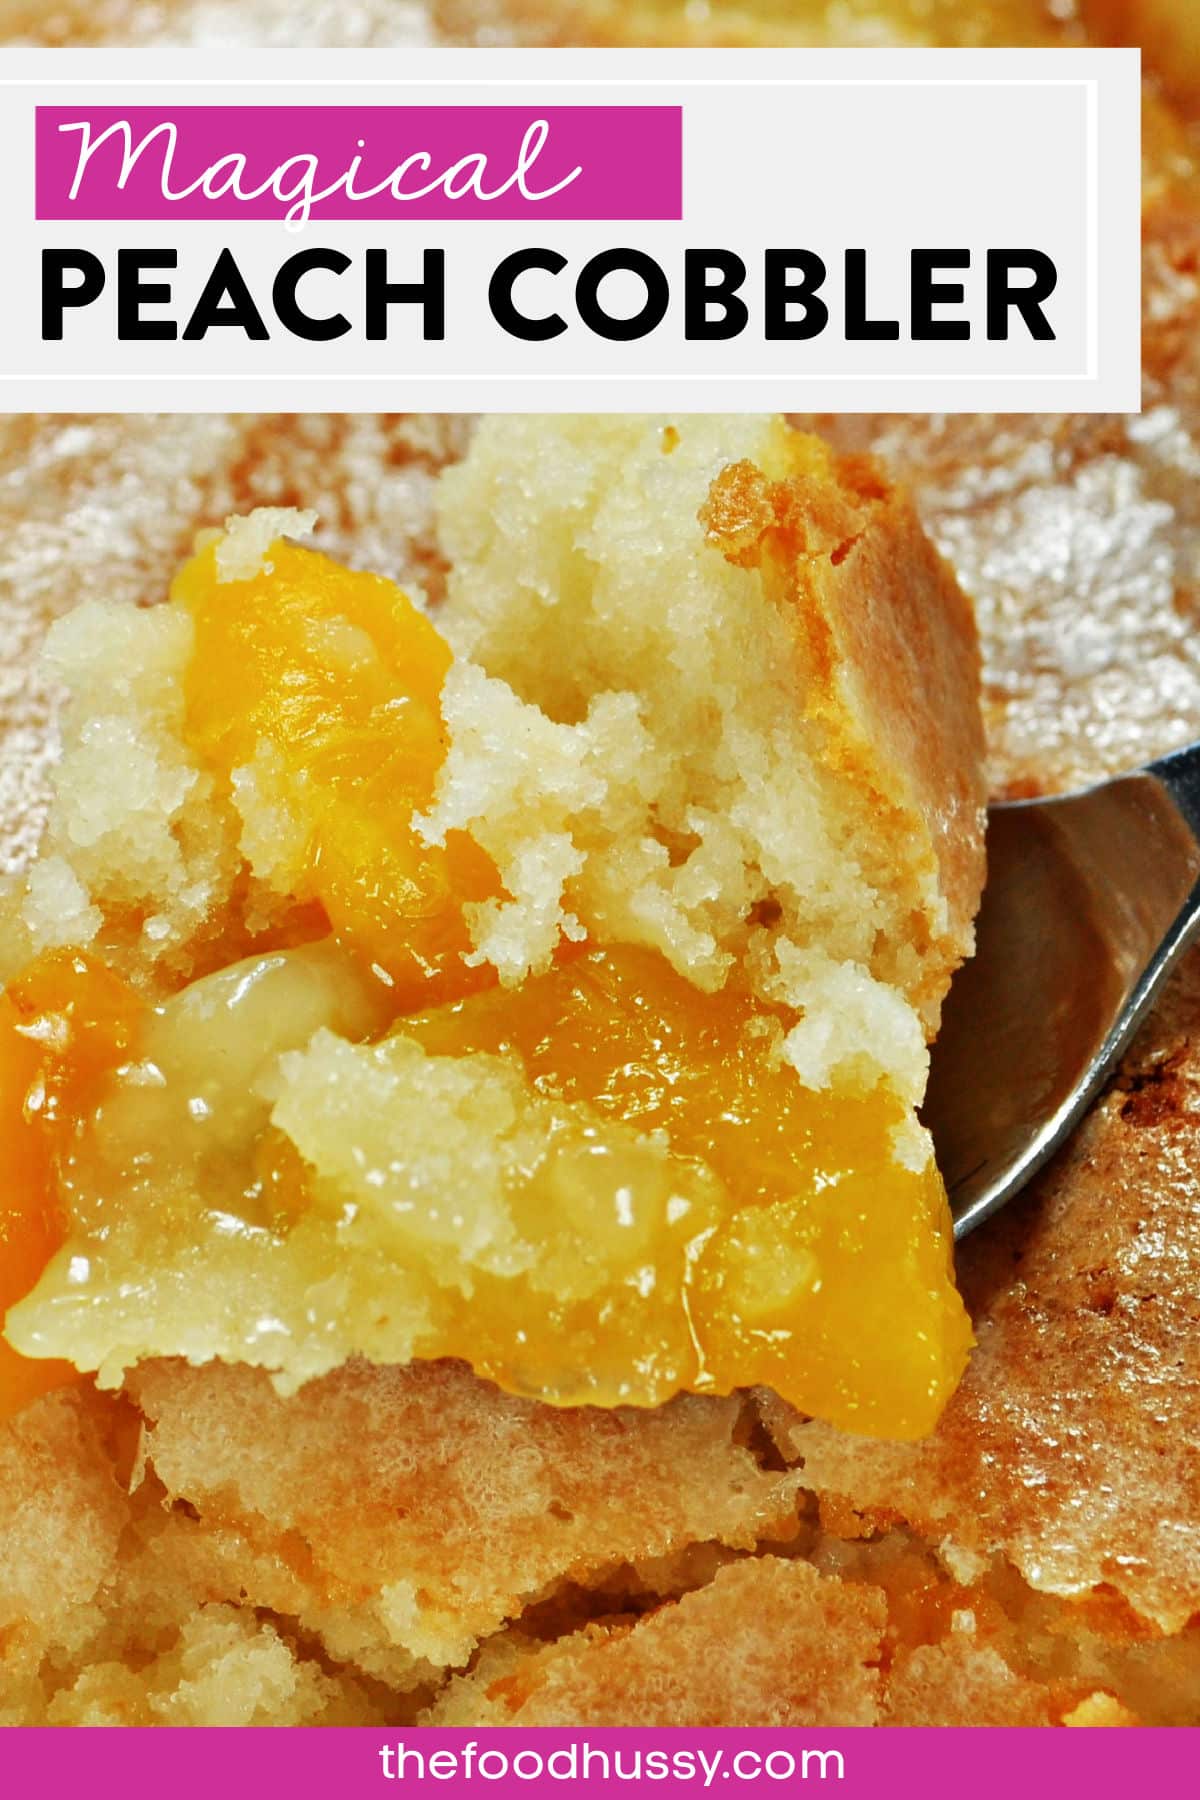 My Mom’s MAGIC peach cobbler is the most perfect dessert! It’s warm and sweet, crunchy and juicy! This was THE dessert I asked her to make for my birthday every year! It's cake with fruit and you can even put ice cream on top (although I prefer whipped cream)! via @foodhussy